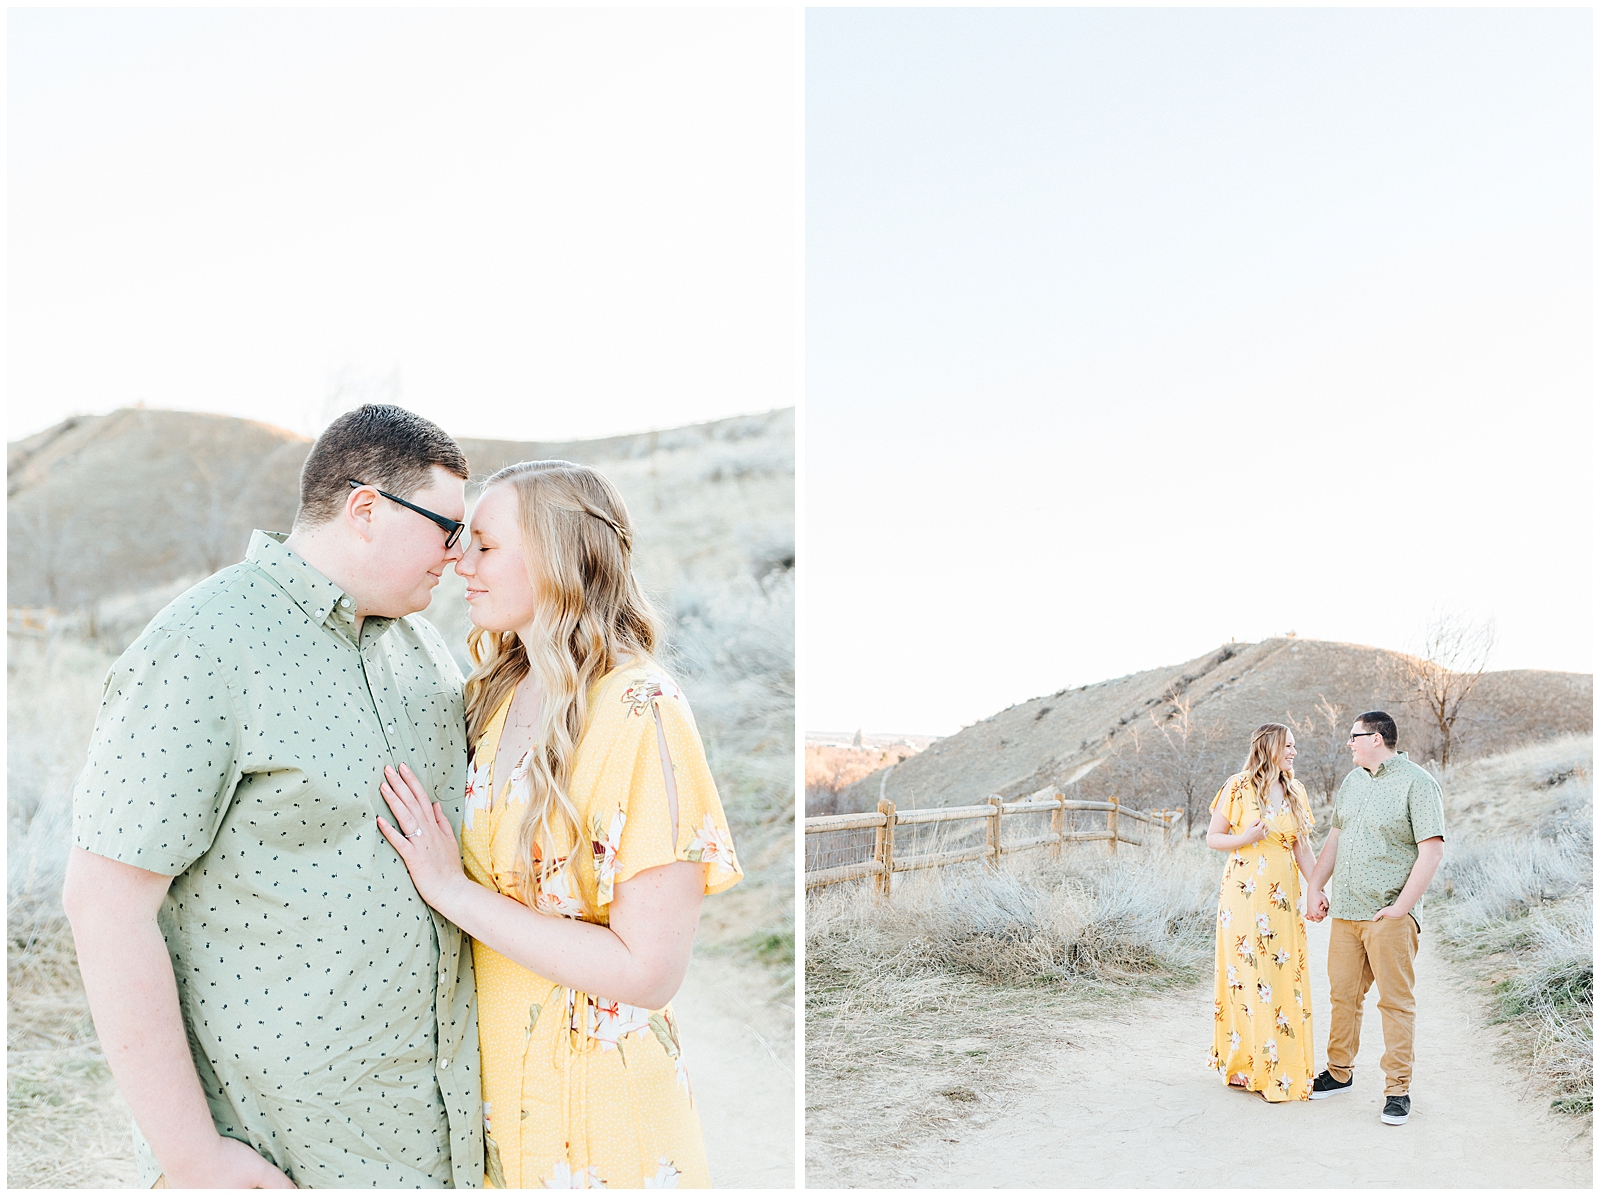 Camel's Back Spring Engagement Session in the Foothills